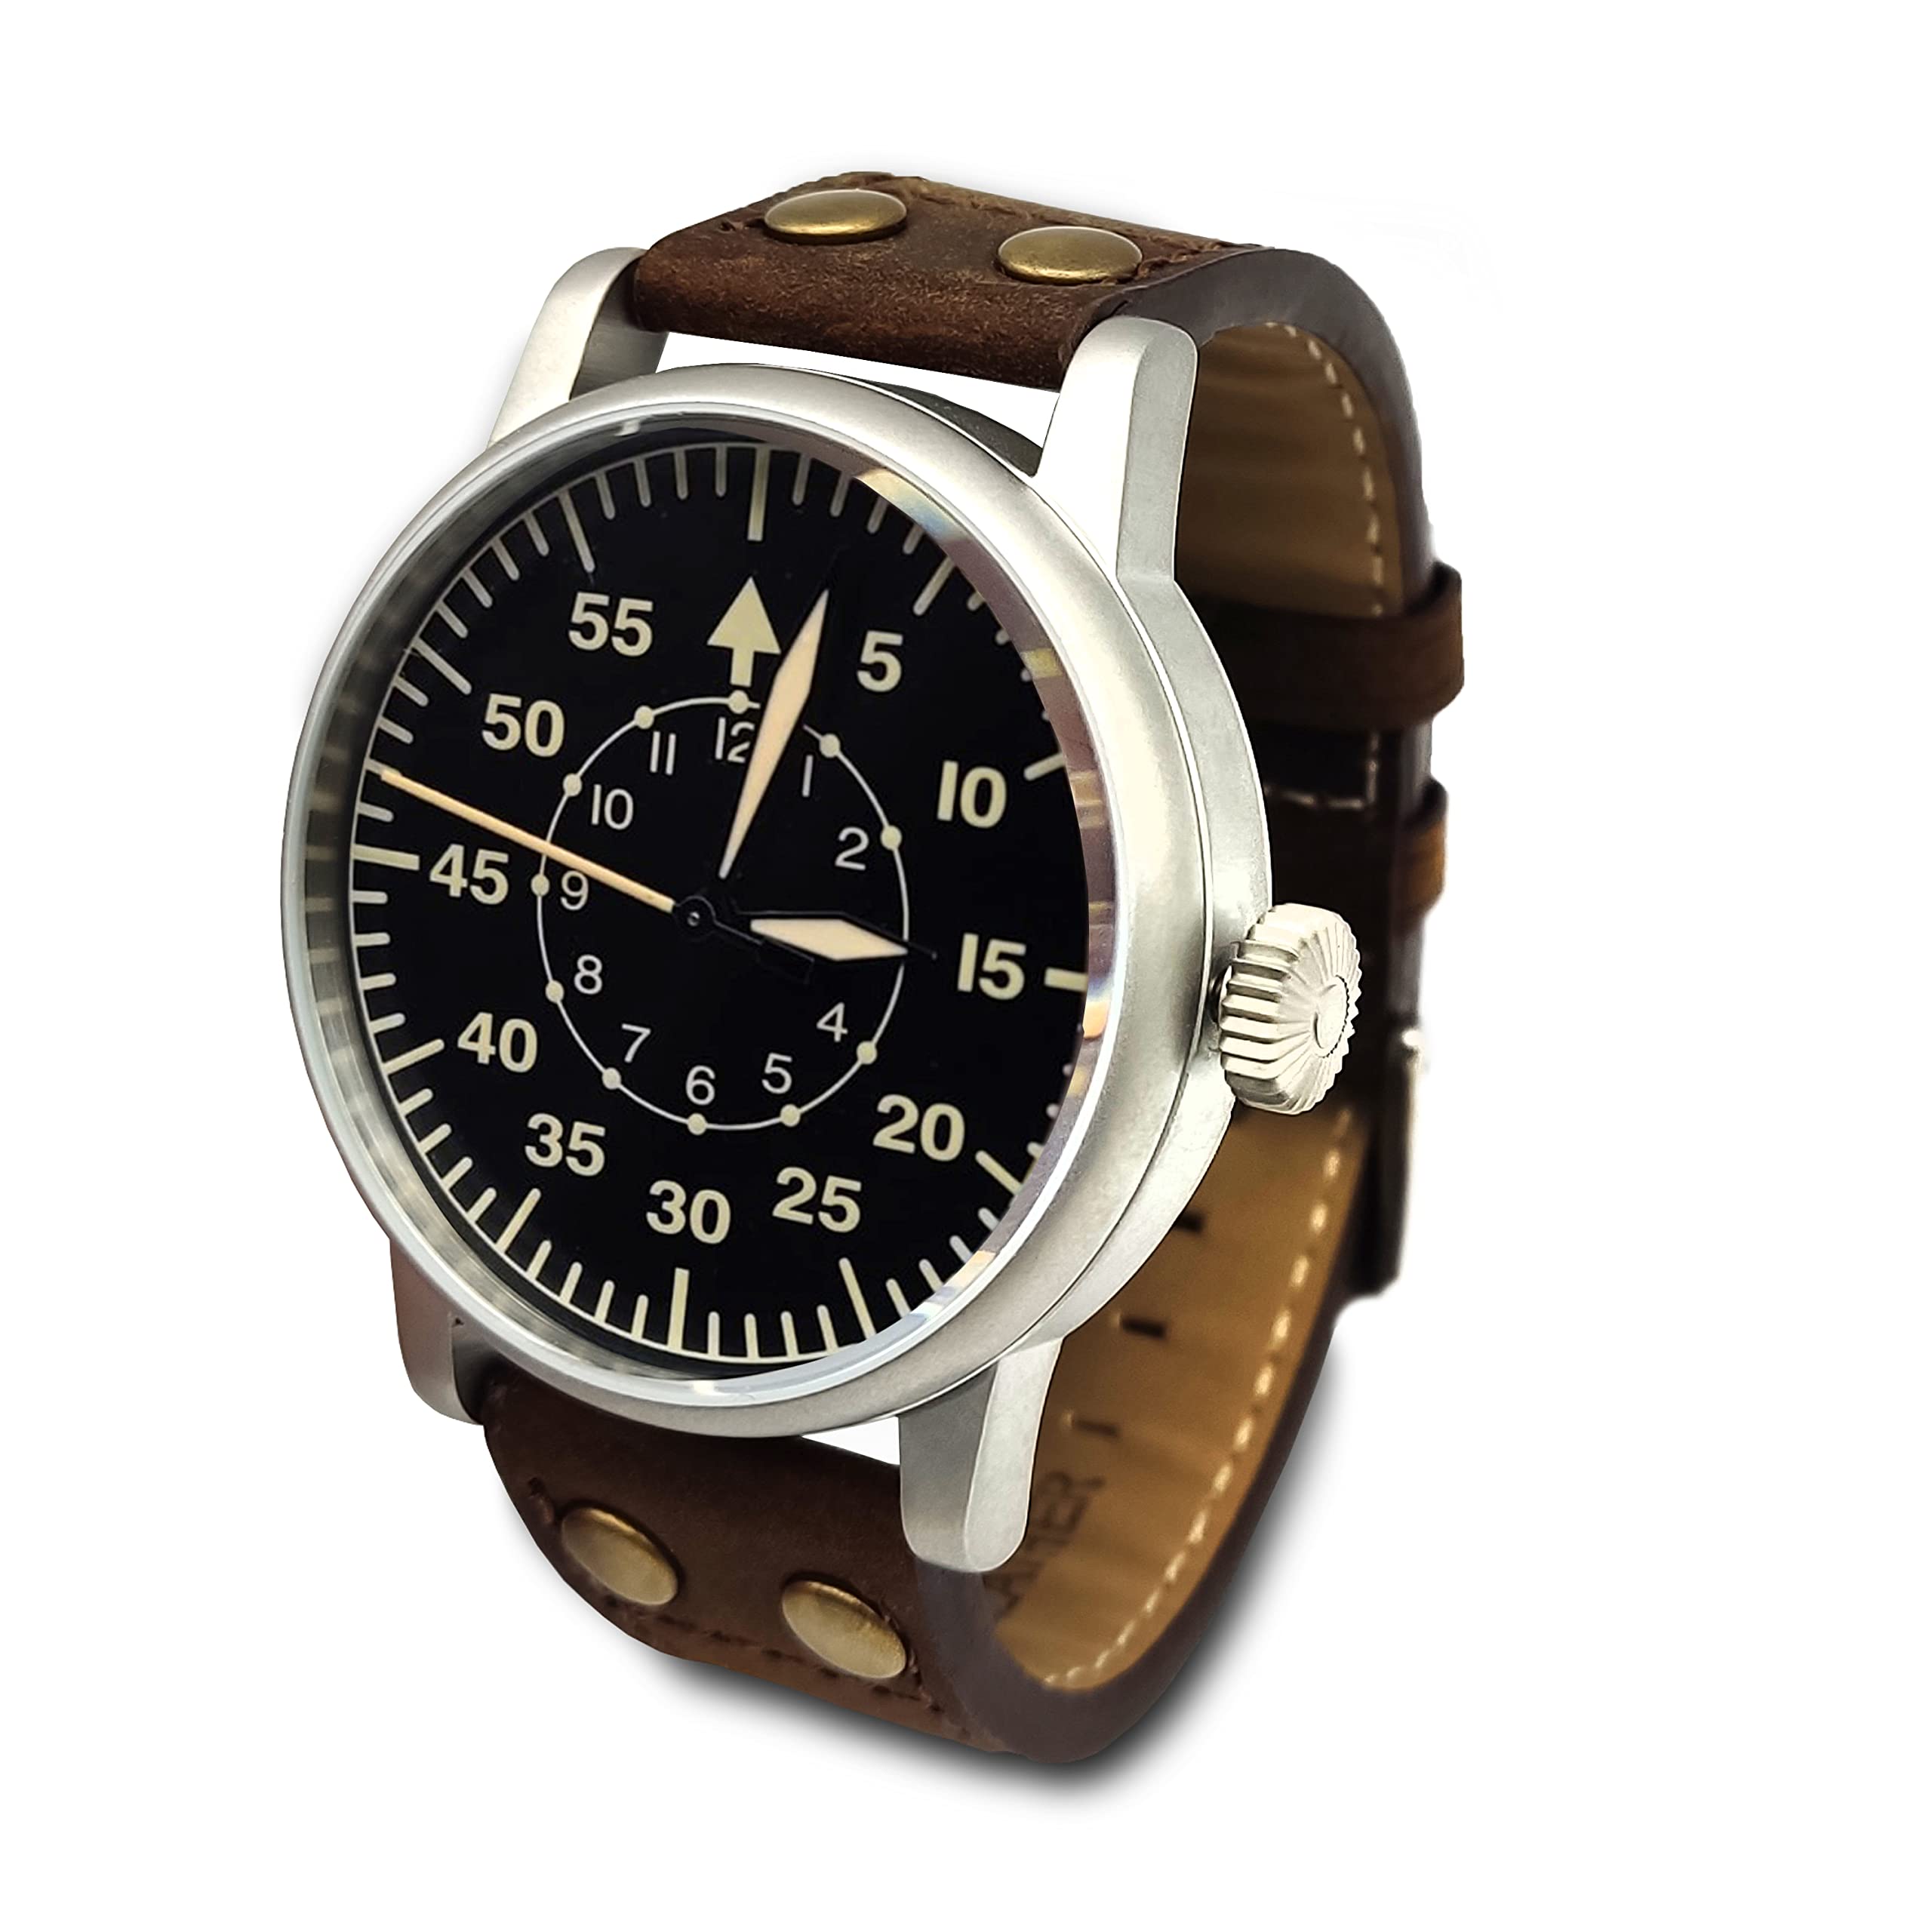 WW2 Military Watch - Vintage Luftwaffe Aviator Watch Automatic Movement with Genuine Leather Strap and 10 ATM Water Resistan